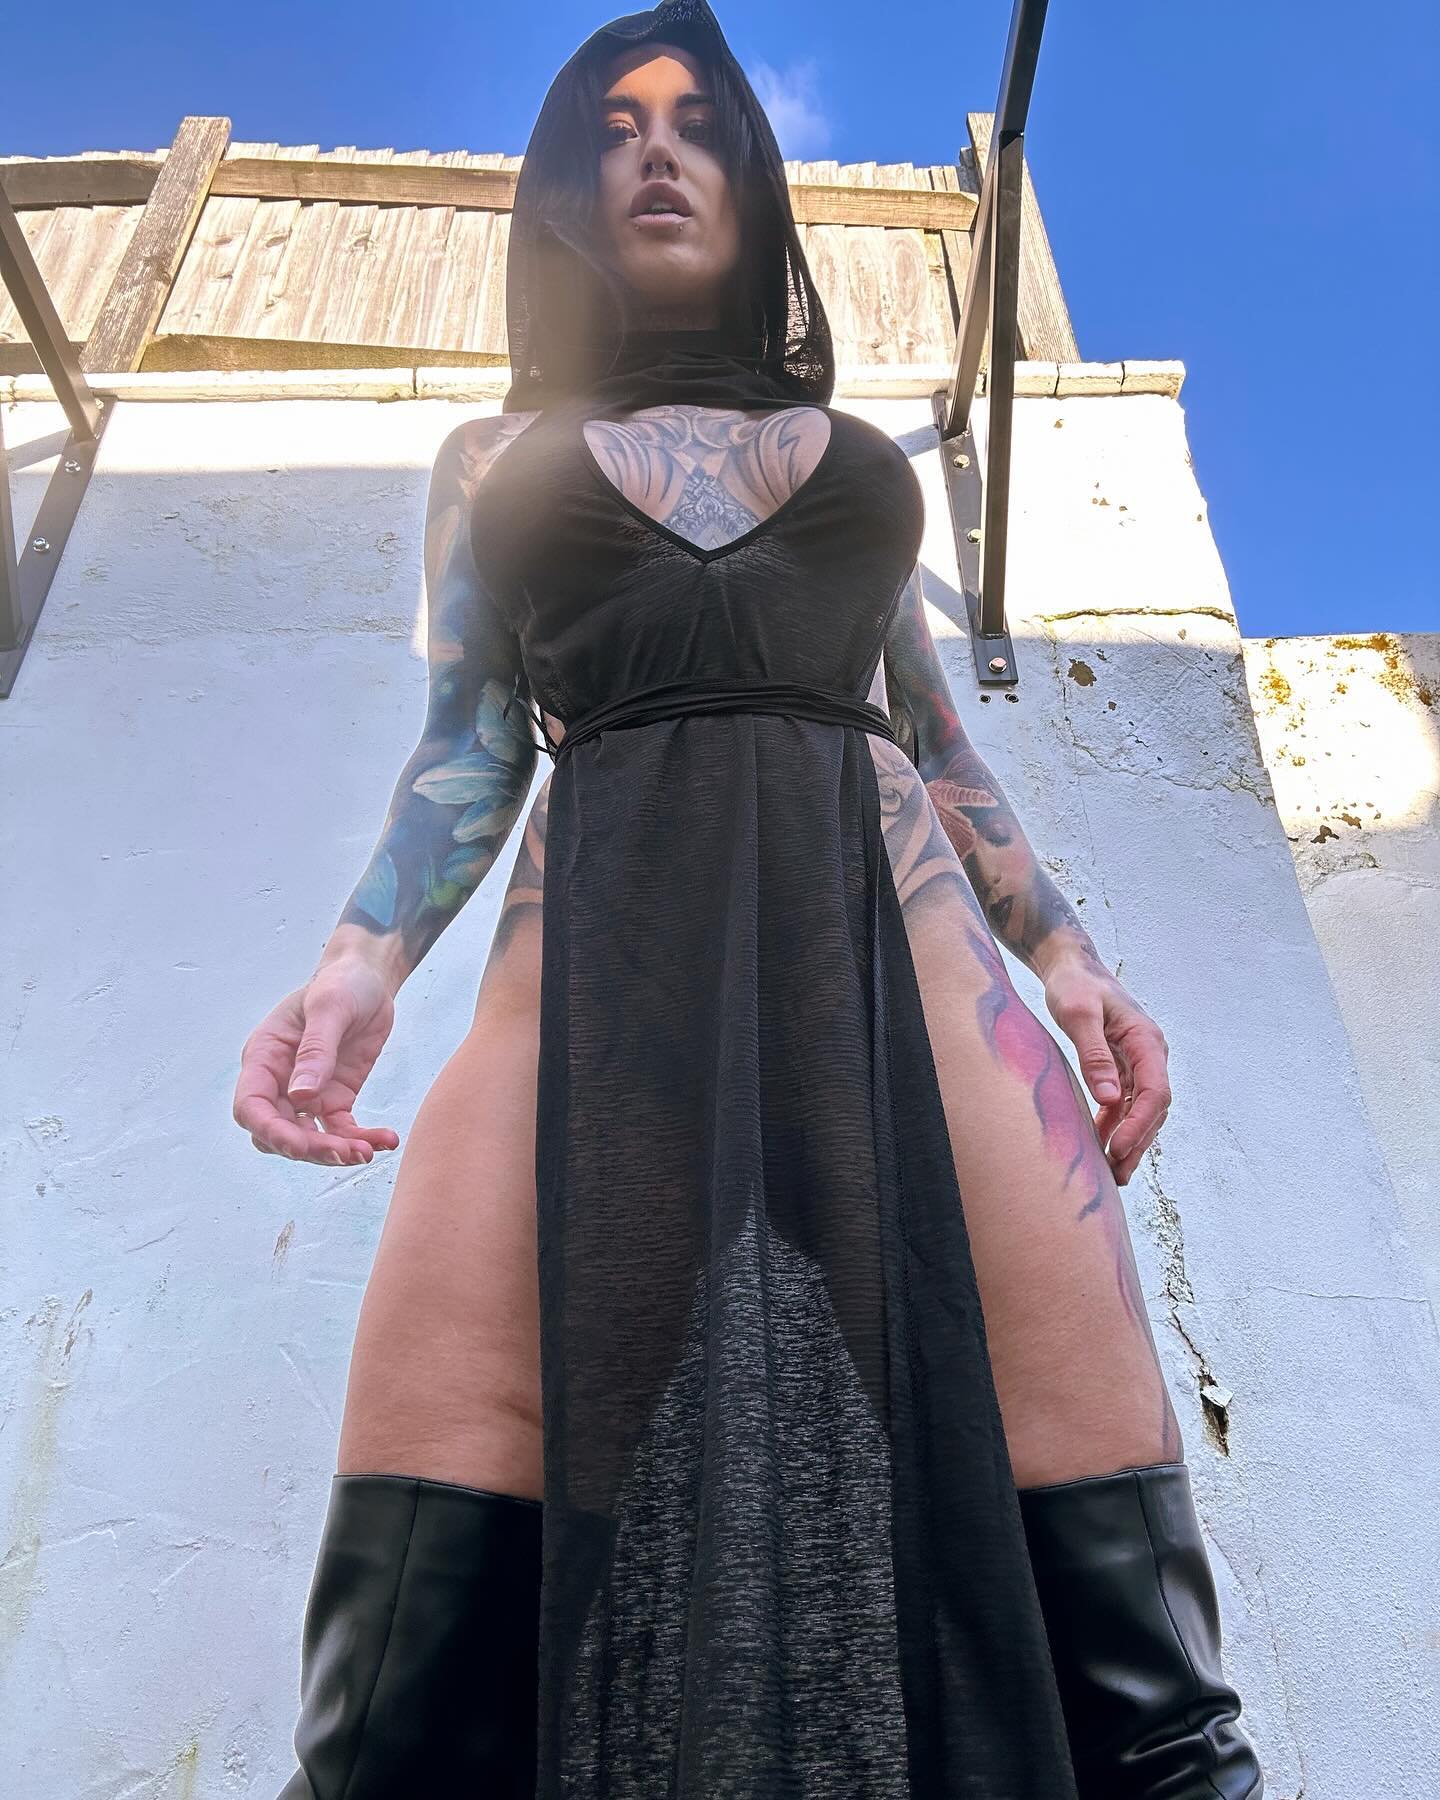 Got tricked into thinking spring was coming and now it’s wet & windy again 😒
.
.
.
.
.
#sheerdress #inked #inkedmodel #tattooed #girlswithtattoos #dune #baddieoutfits #festivalfit #fitgirls #beautifulgirls #dollskill